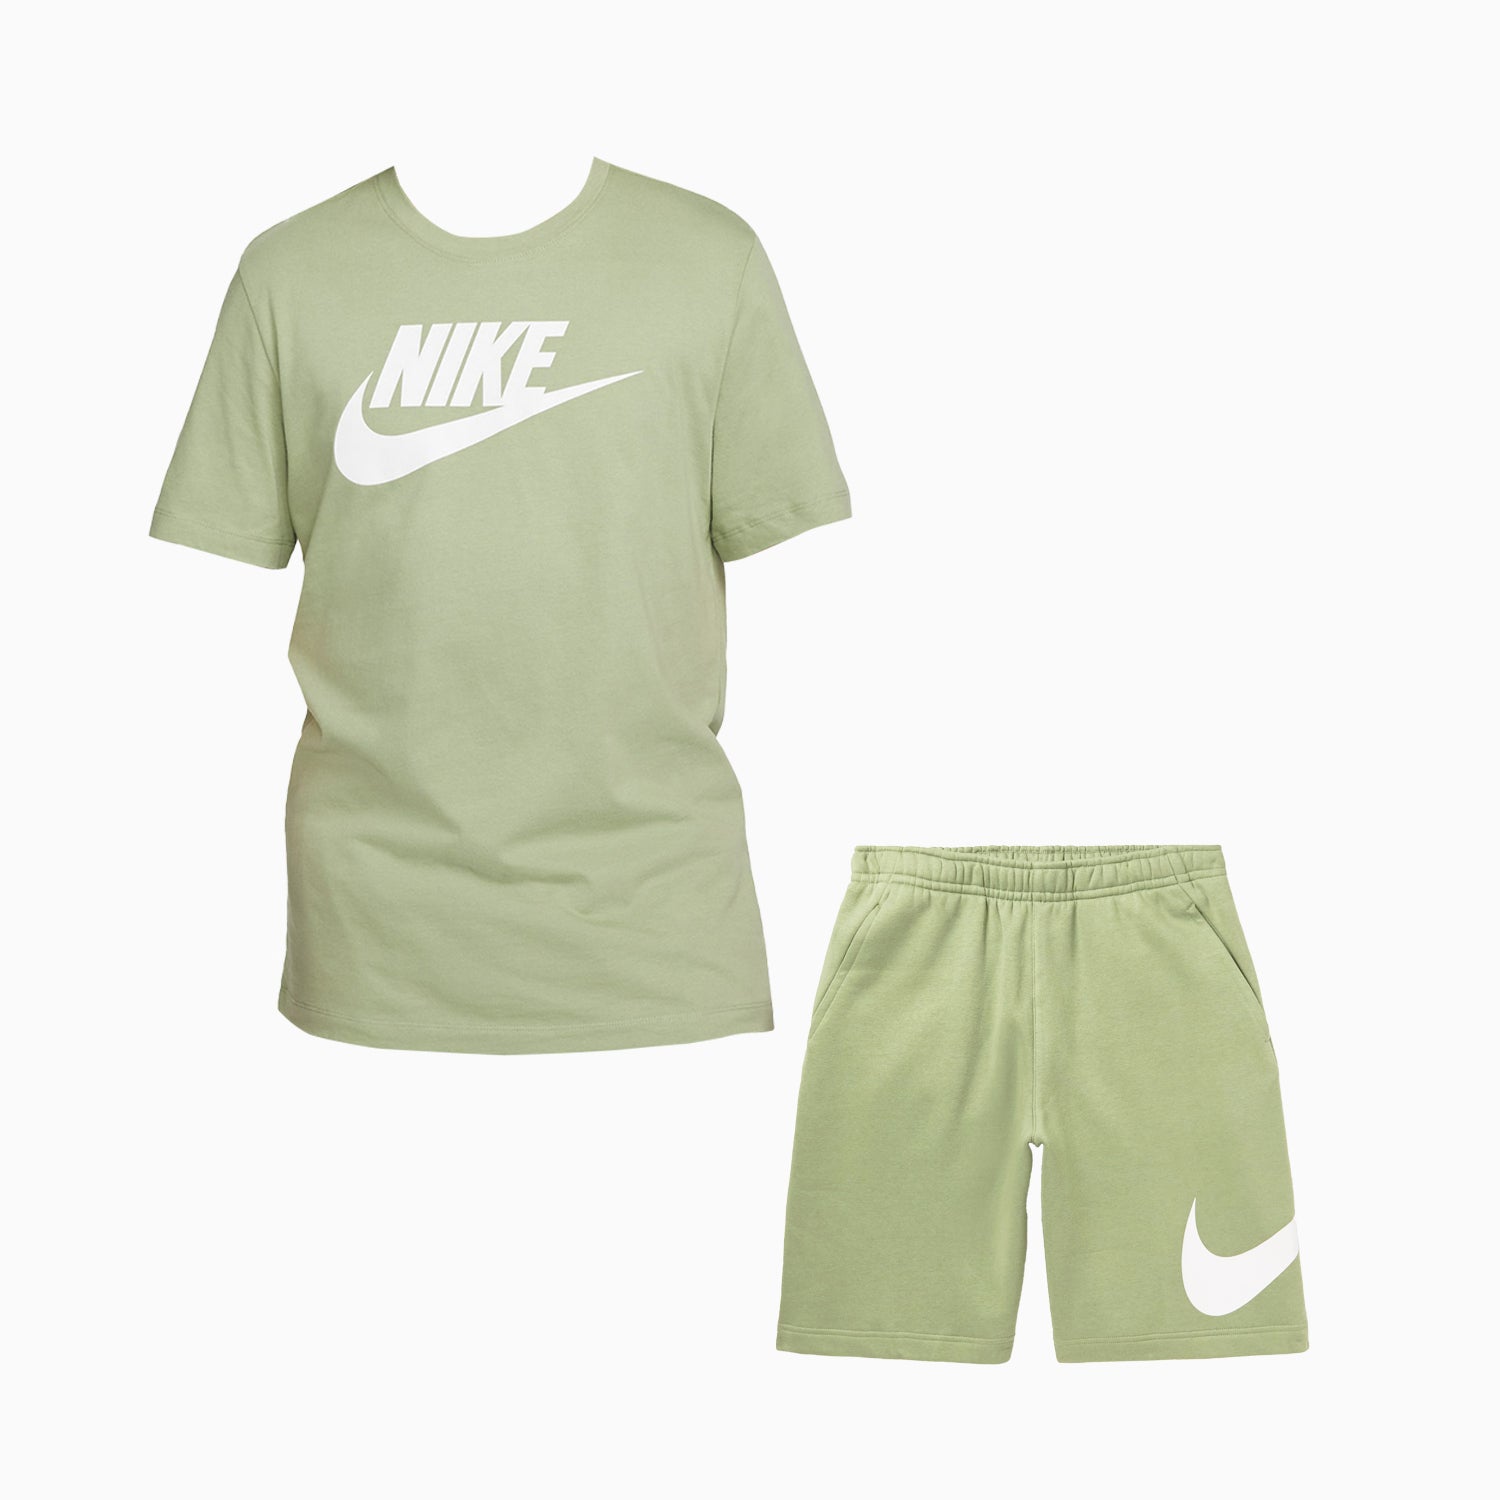 nike-mens-nike-sportswear-t-shirt-and-shorts-outfit-ar5004-386-bv2721-386